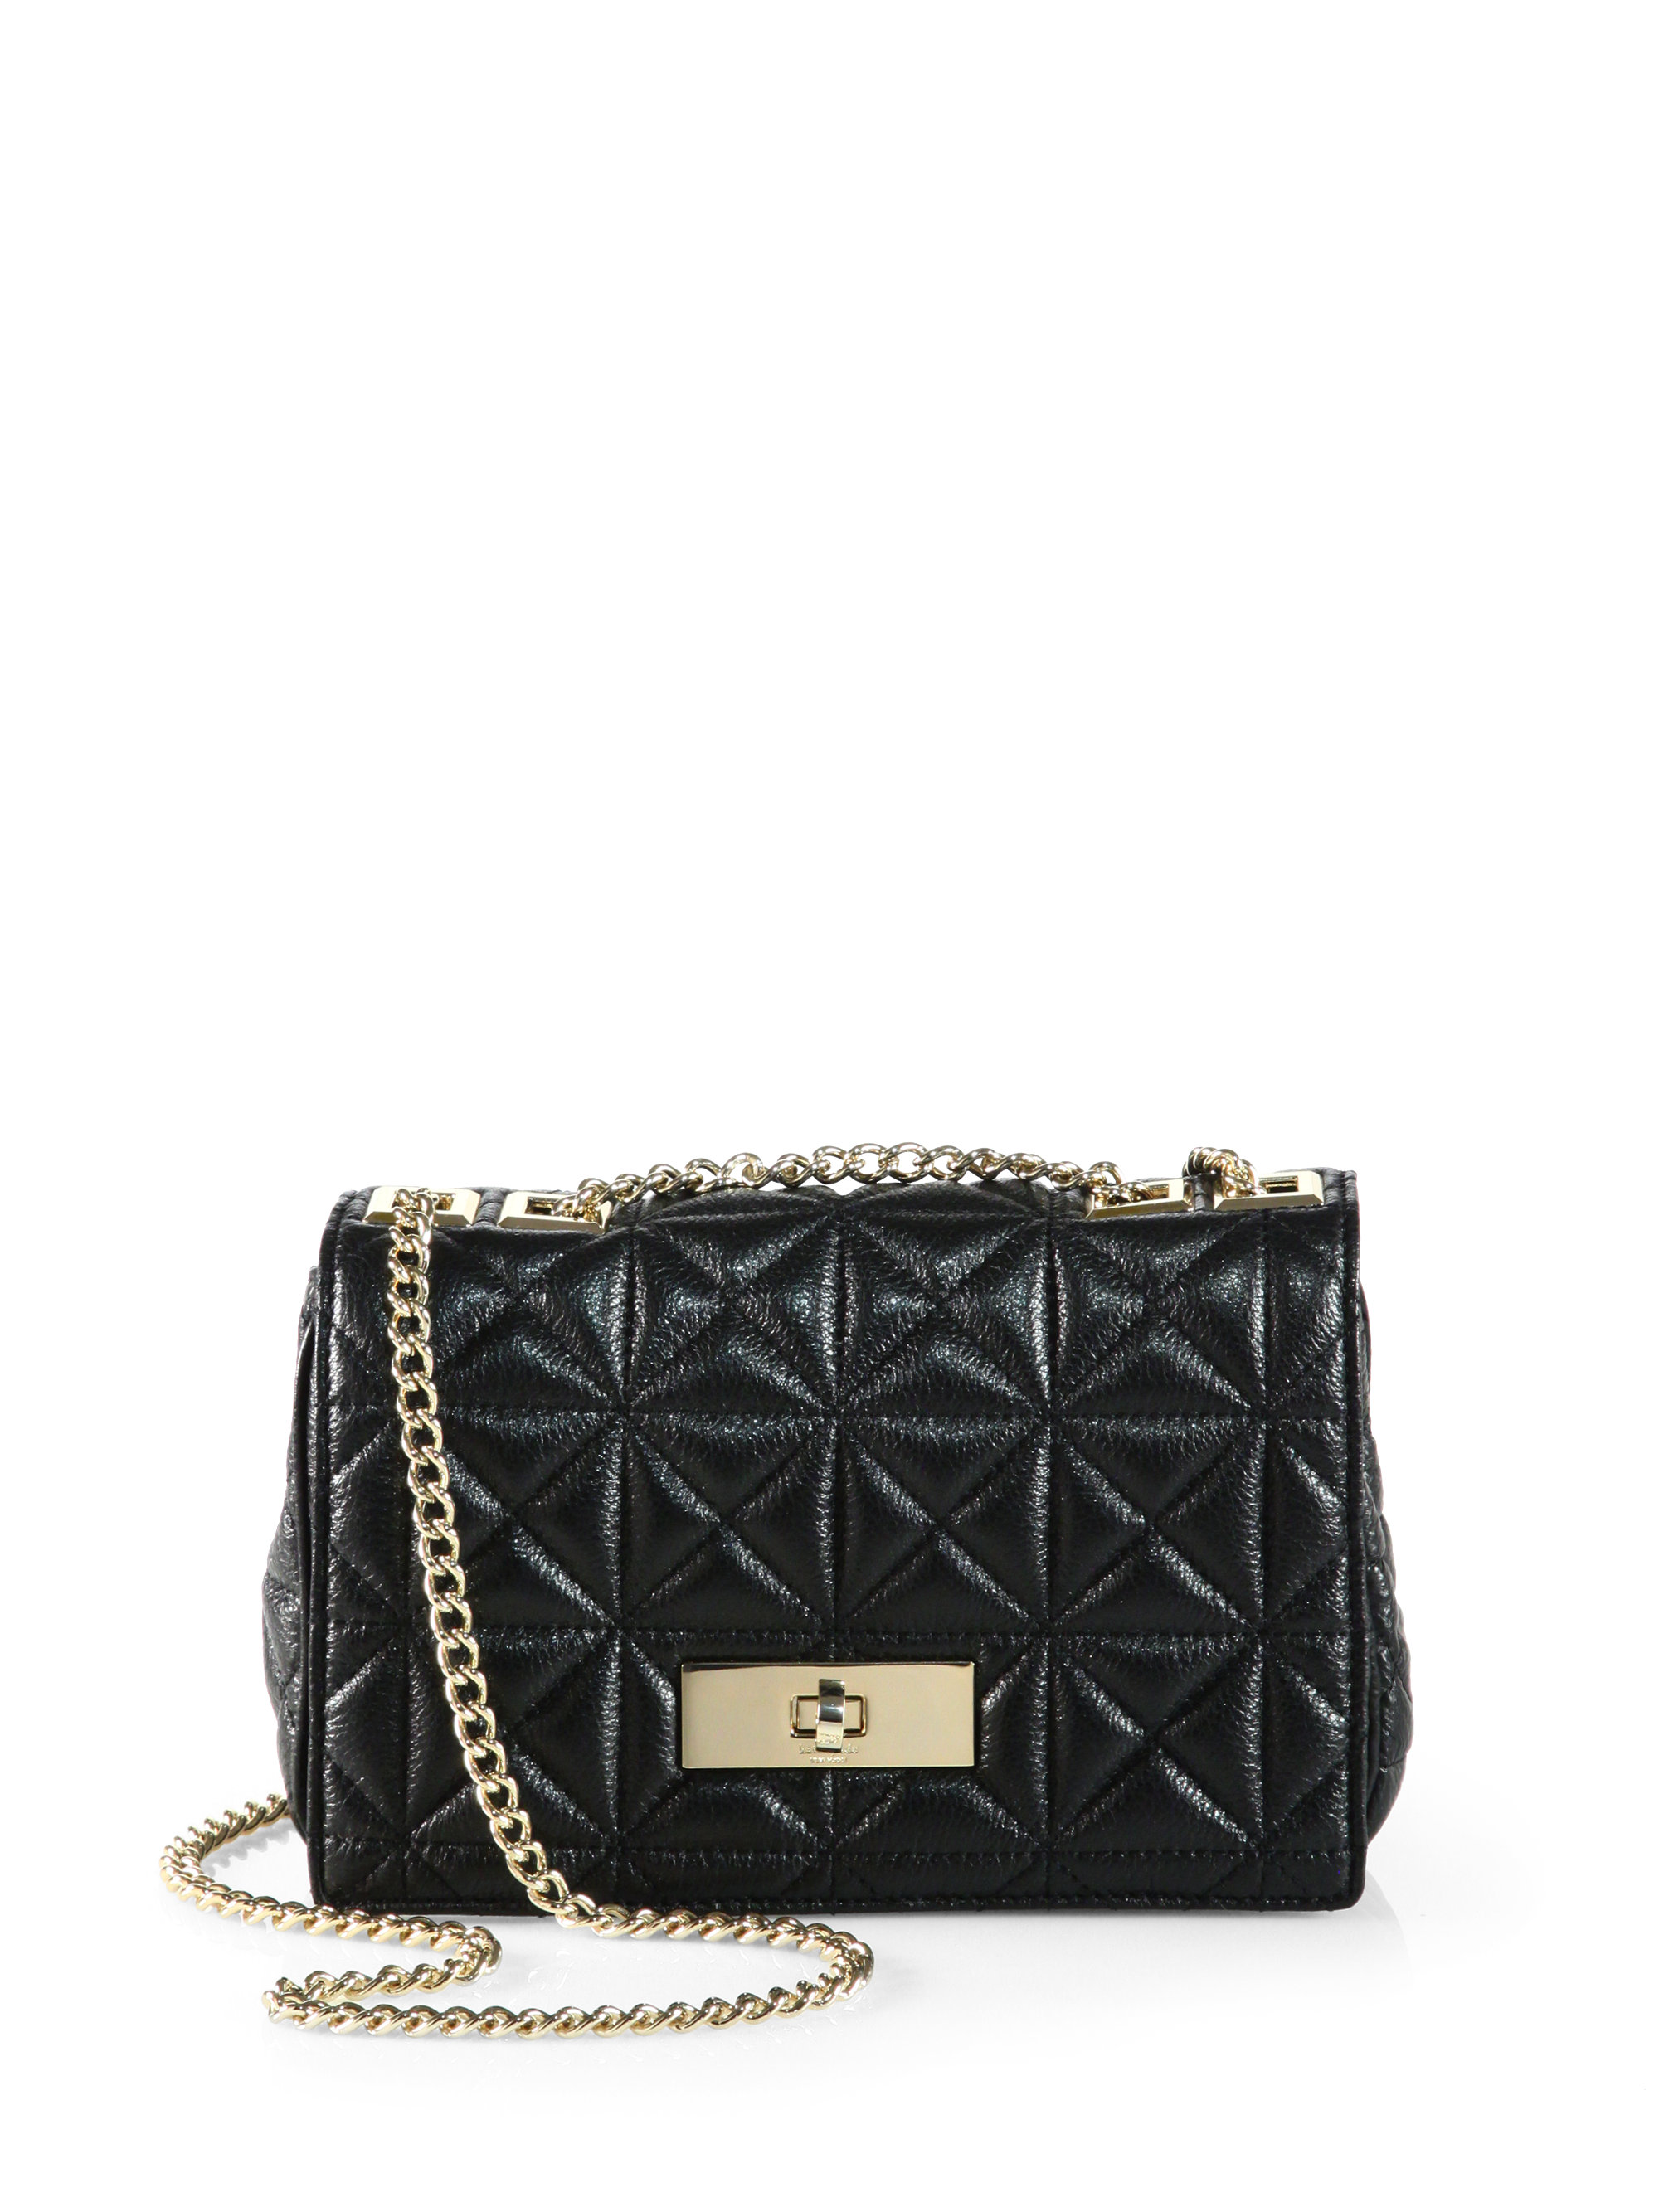 Lyst - Kate Spade New York Sedgwick Place Fairlee Quilted Shoulder Bag ...